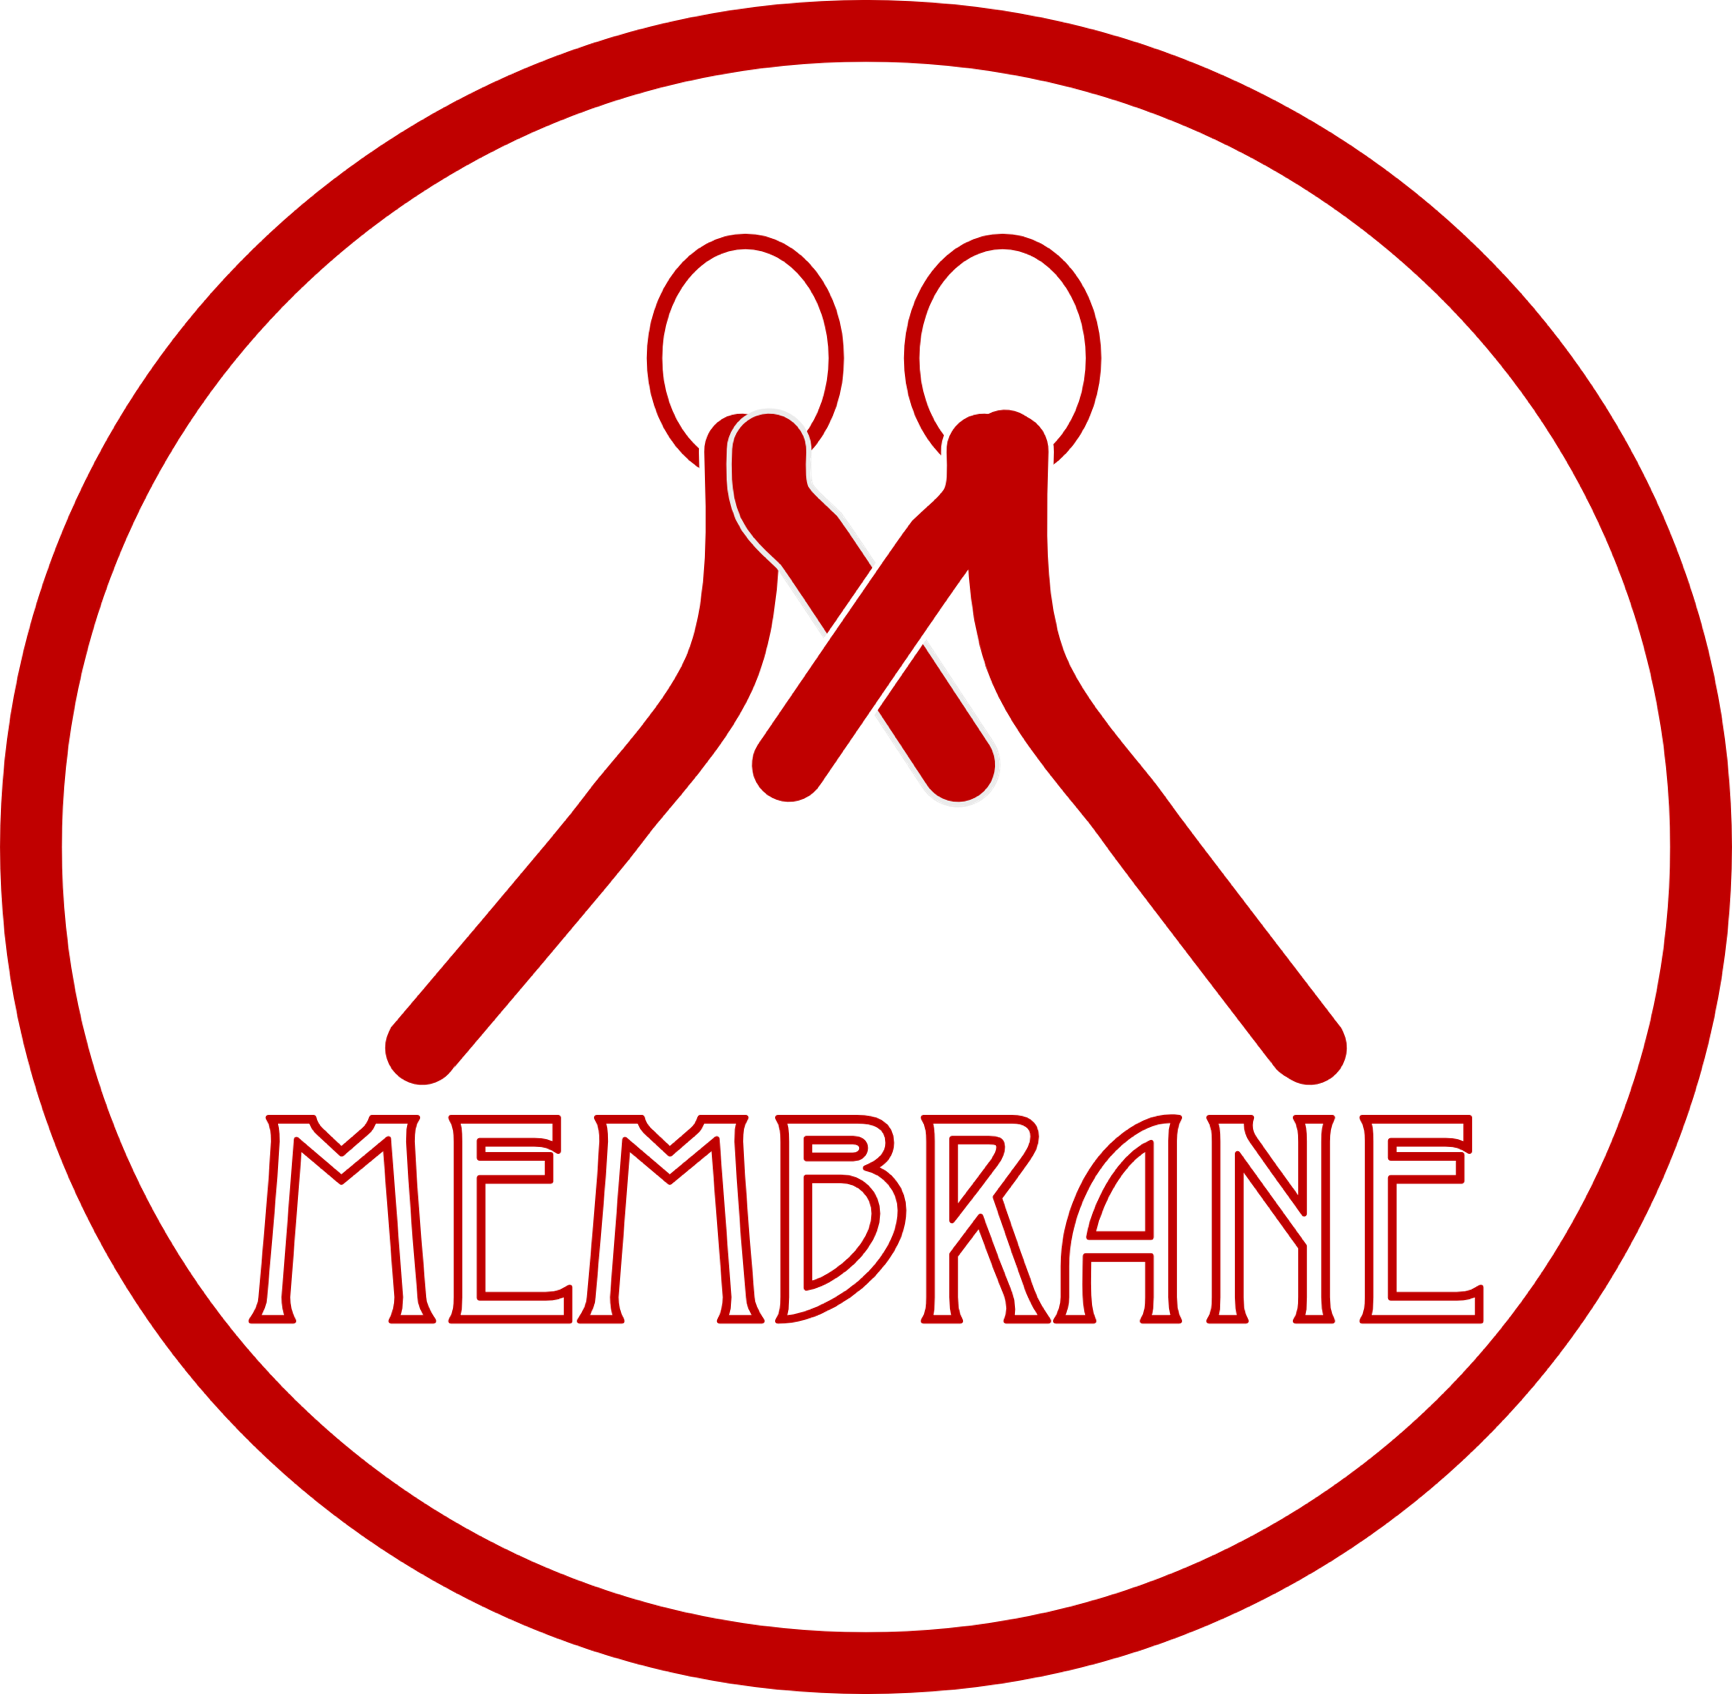 A slideshow of the Membrane Band